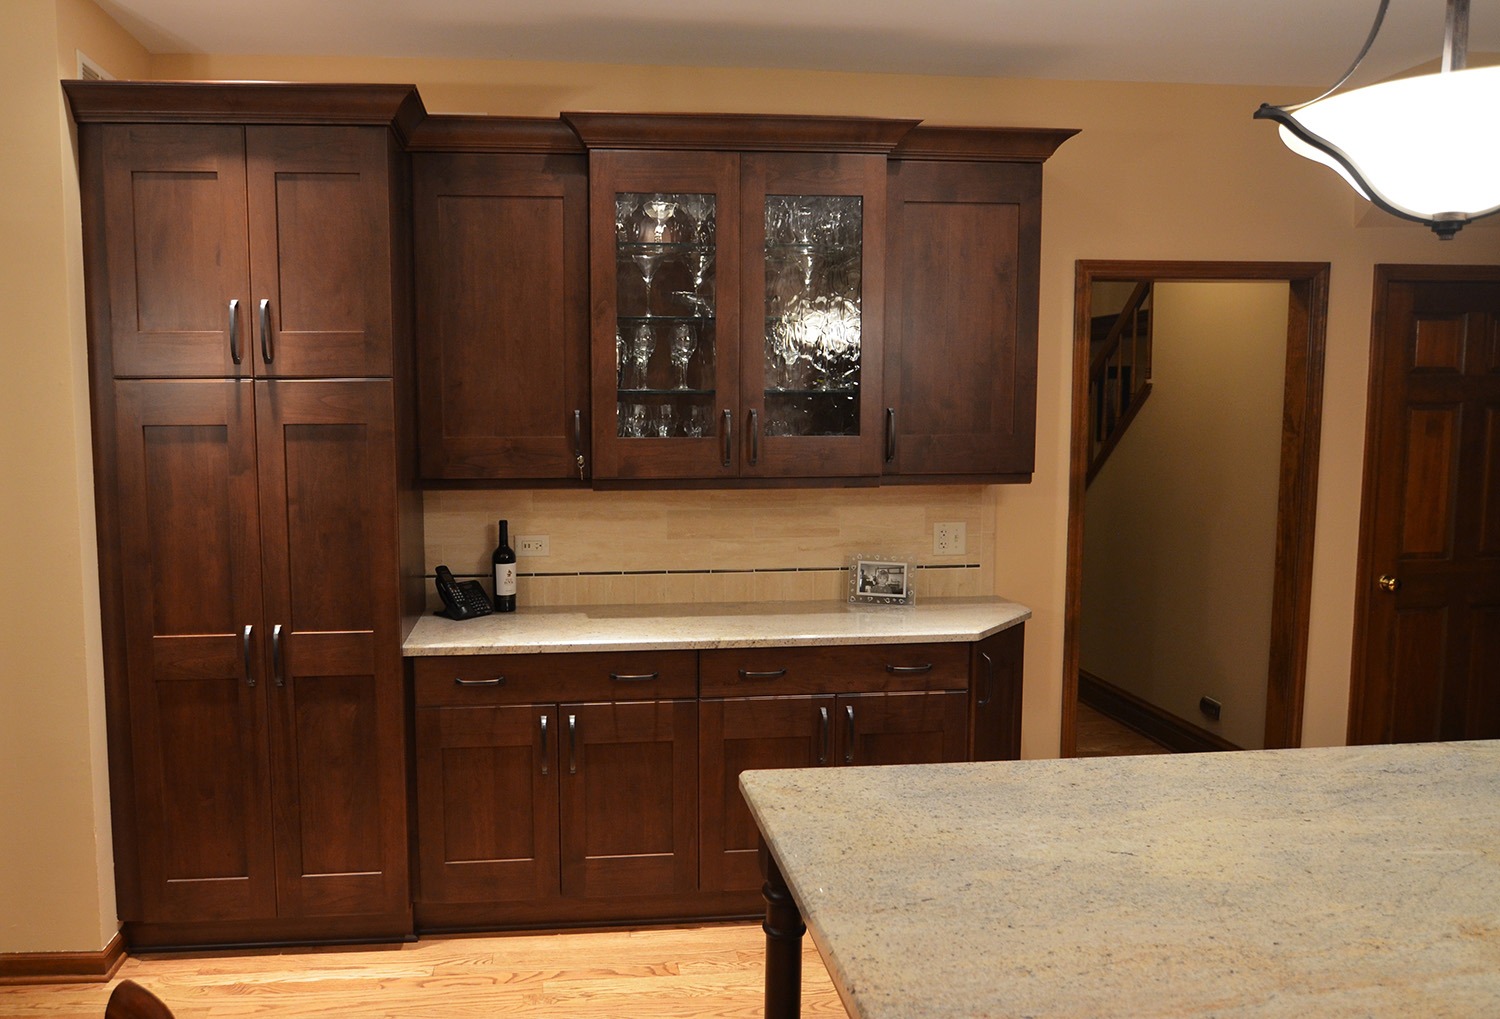 Kitchen with island, cabinets, drawers, and polished stone countertops